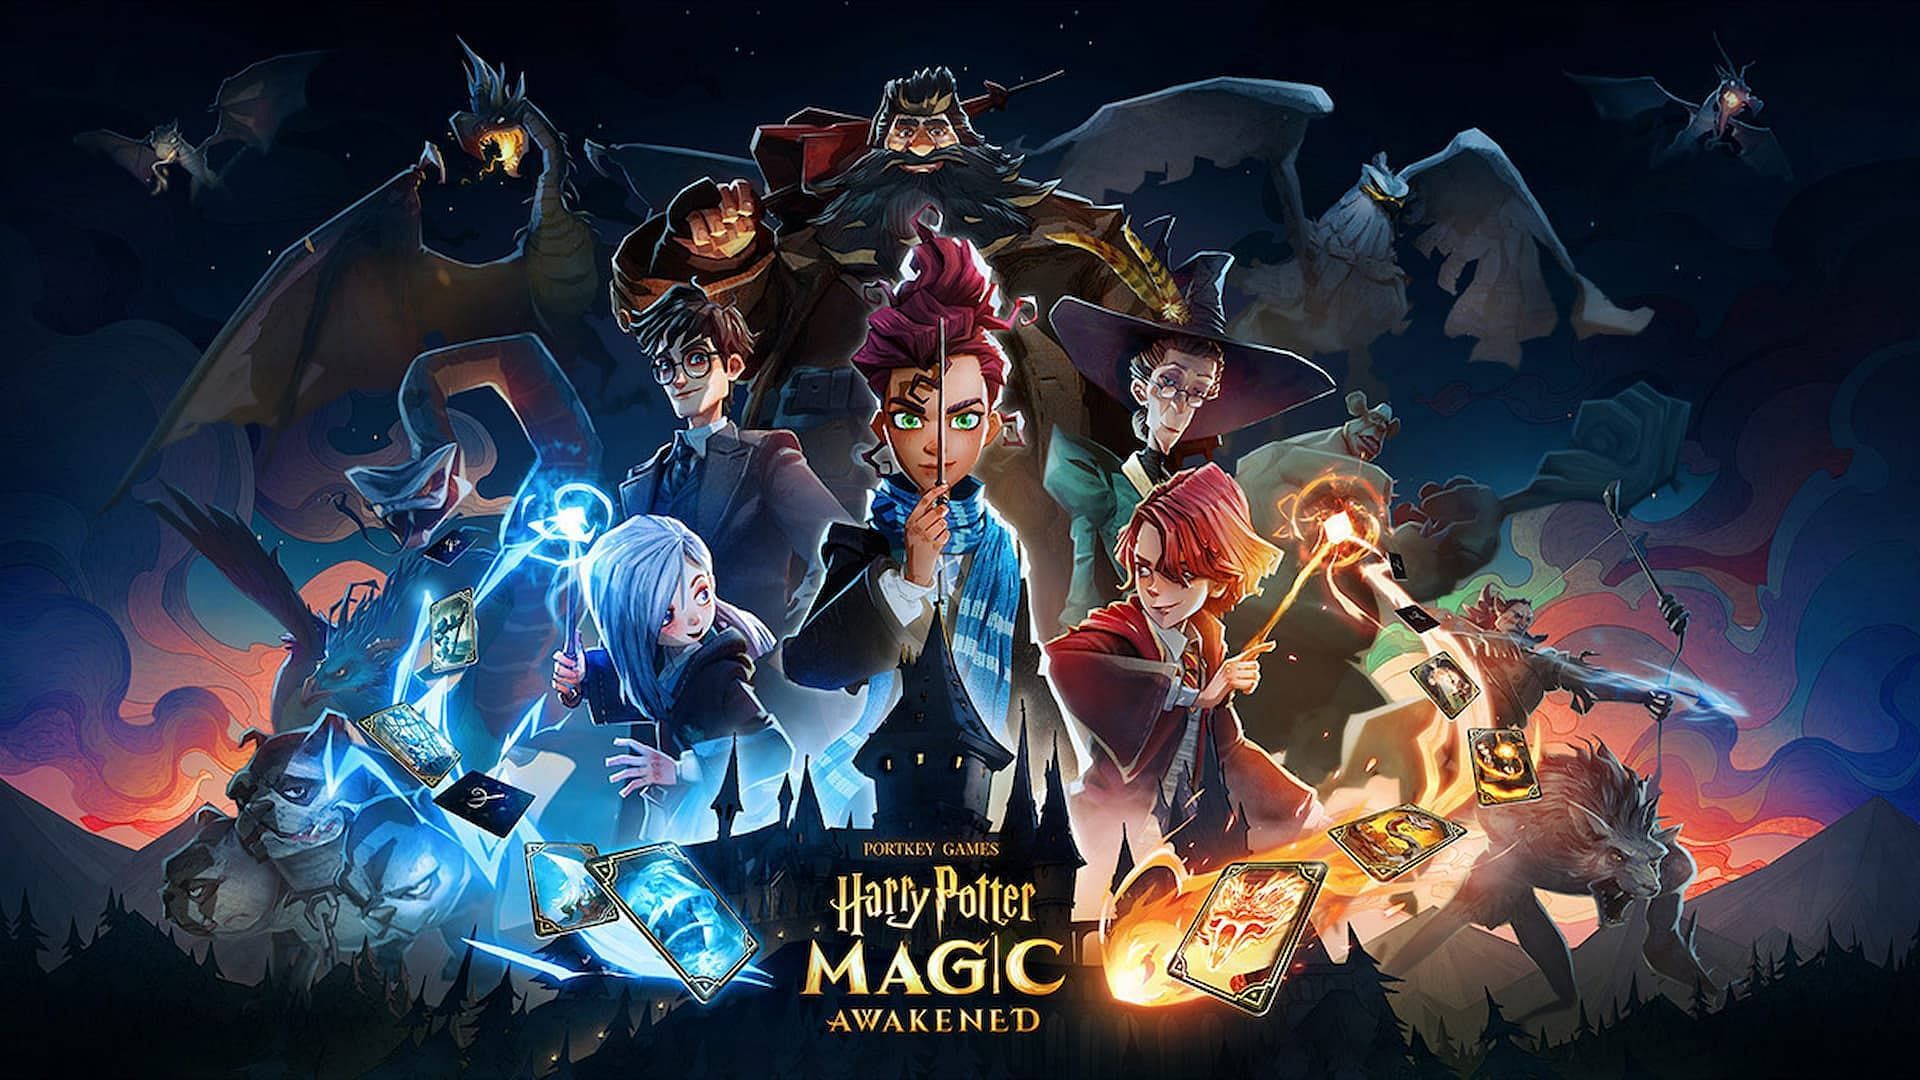 Harry Potter Magic Awakened allows you to experience life as a student at Hogwarts (Image via WB Games)